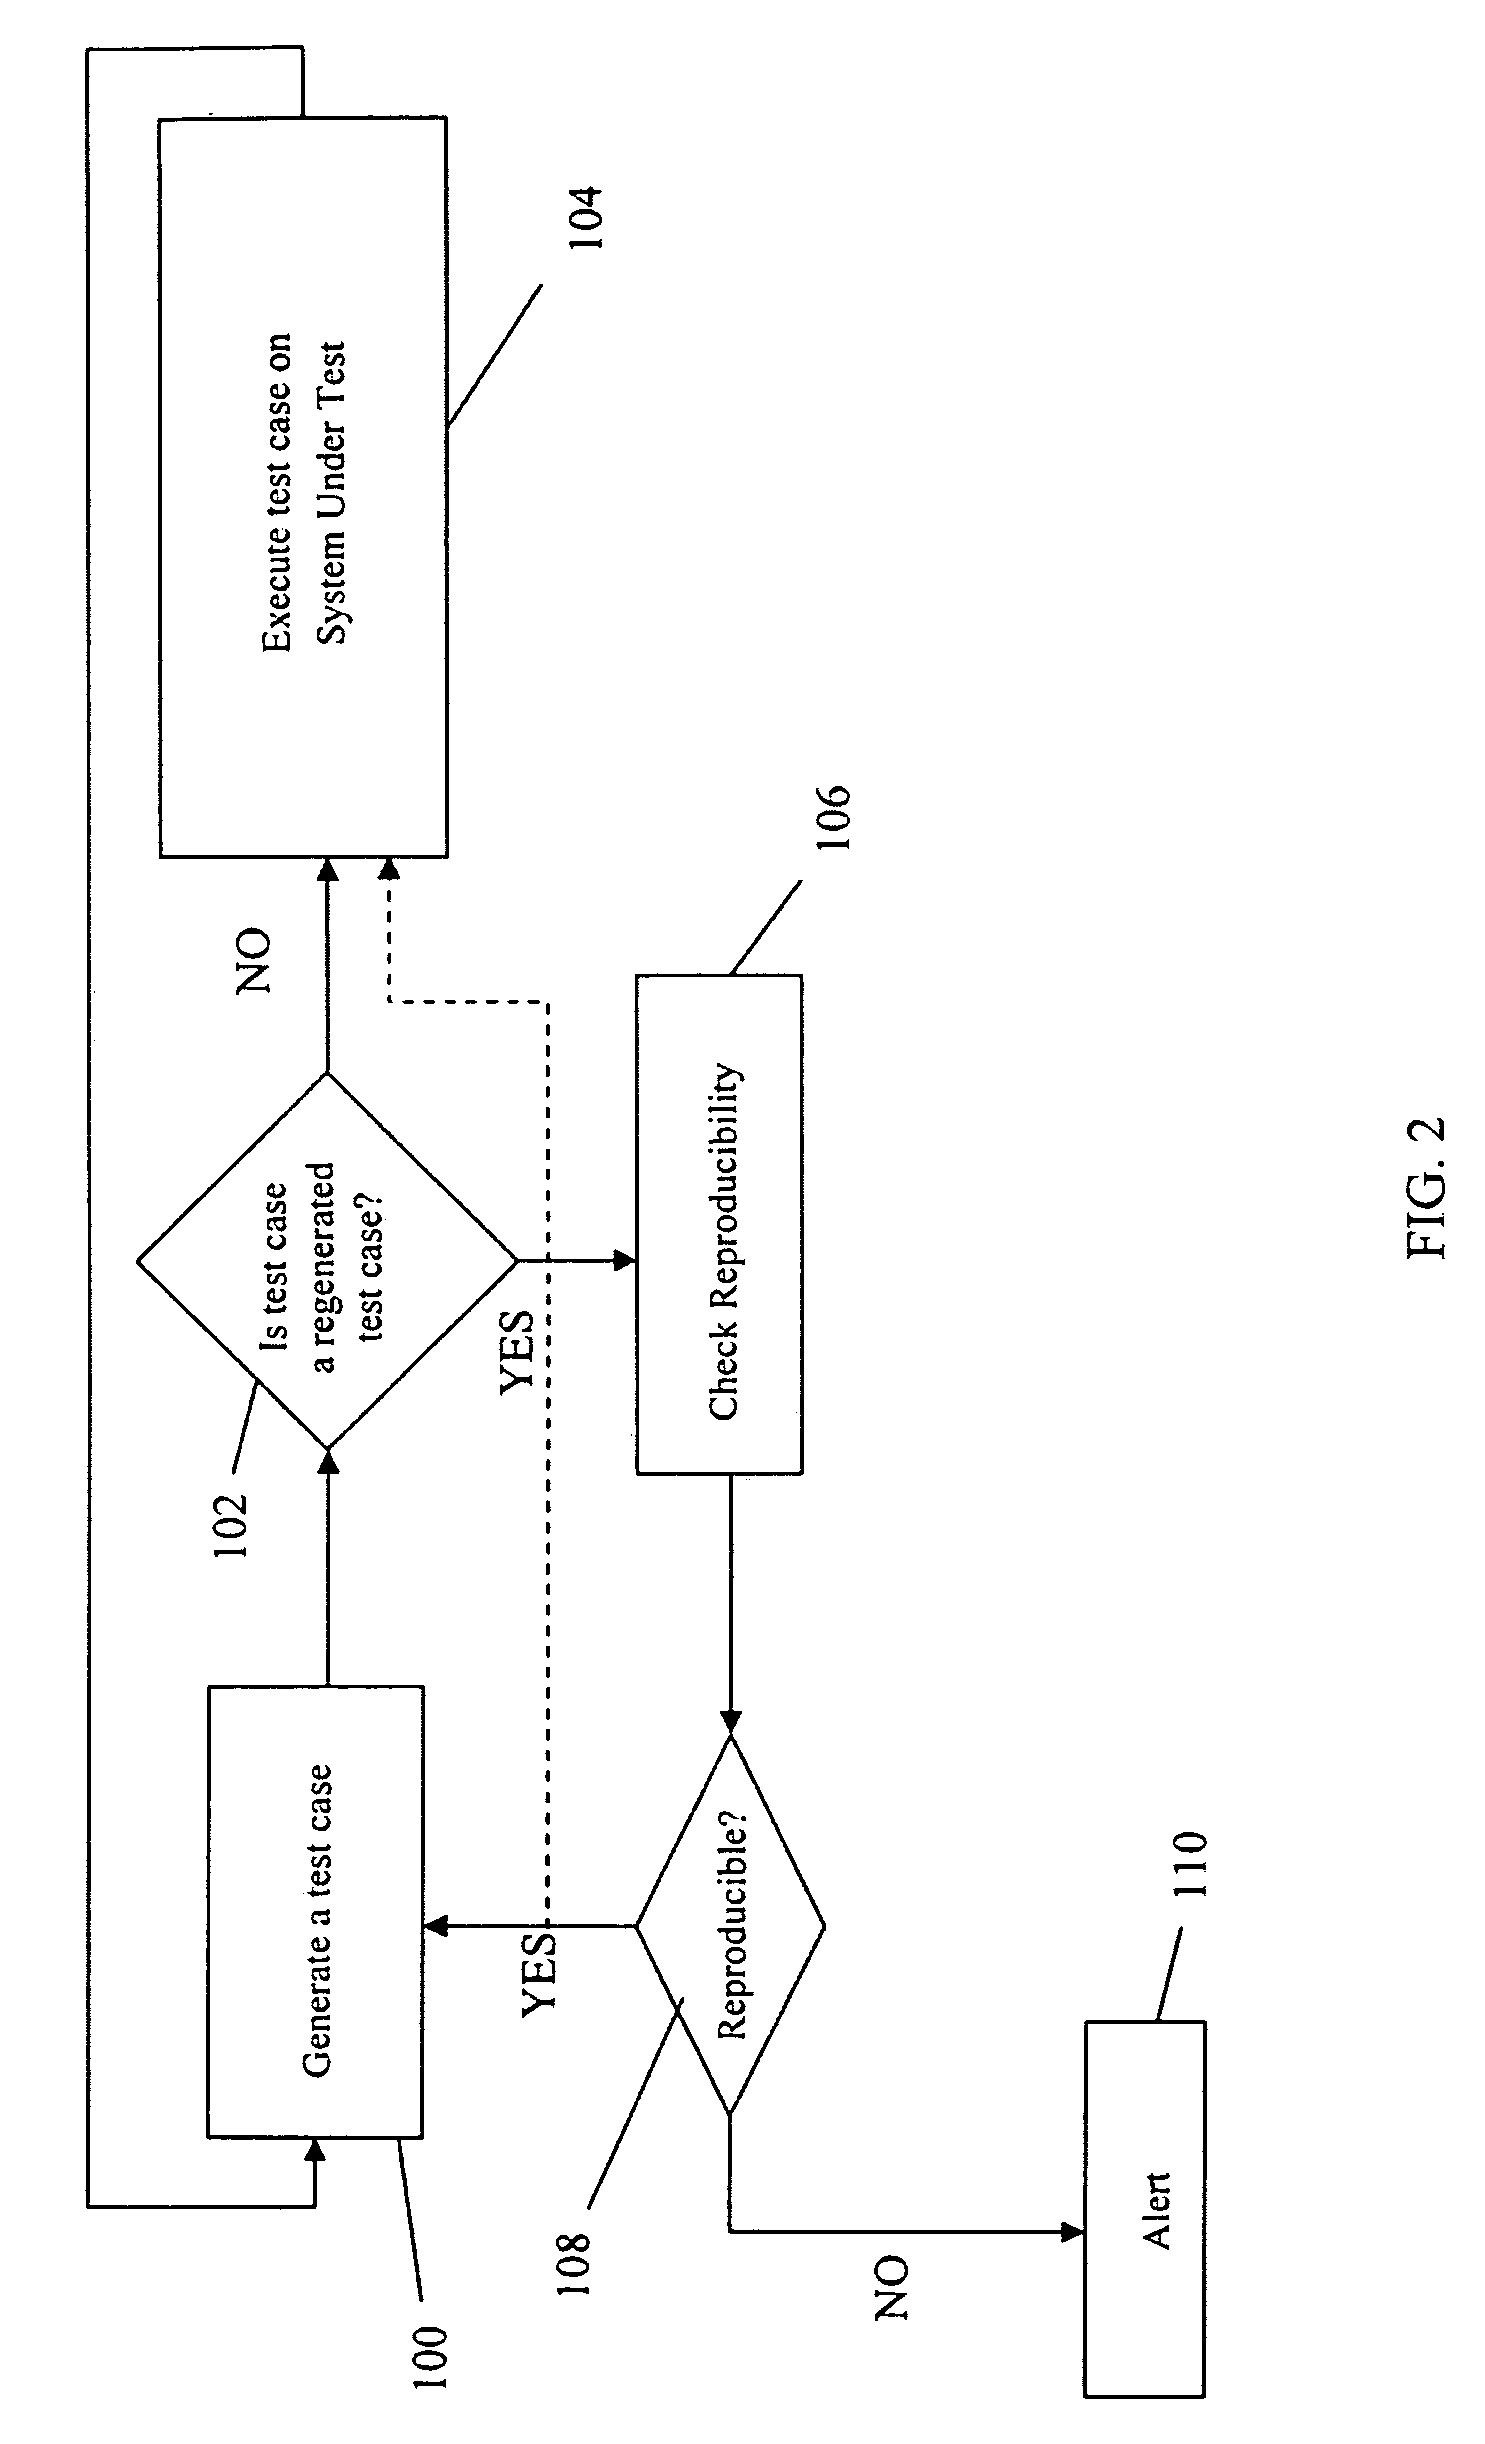 System and method for detecting non-reproducible pseudo-random test cases